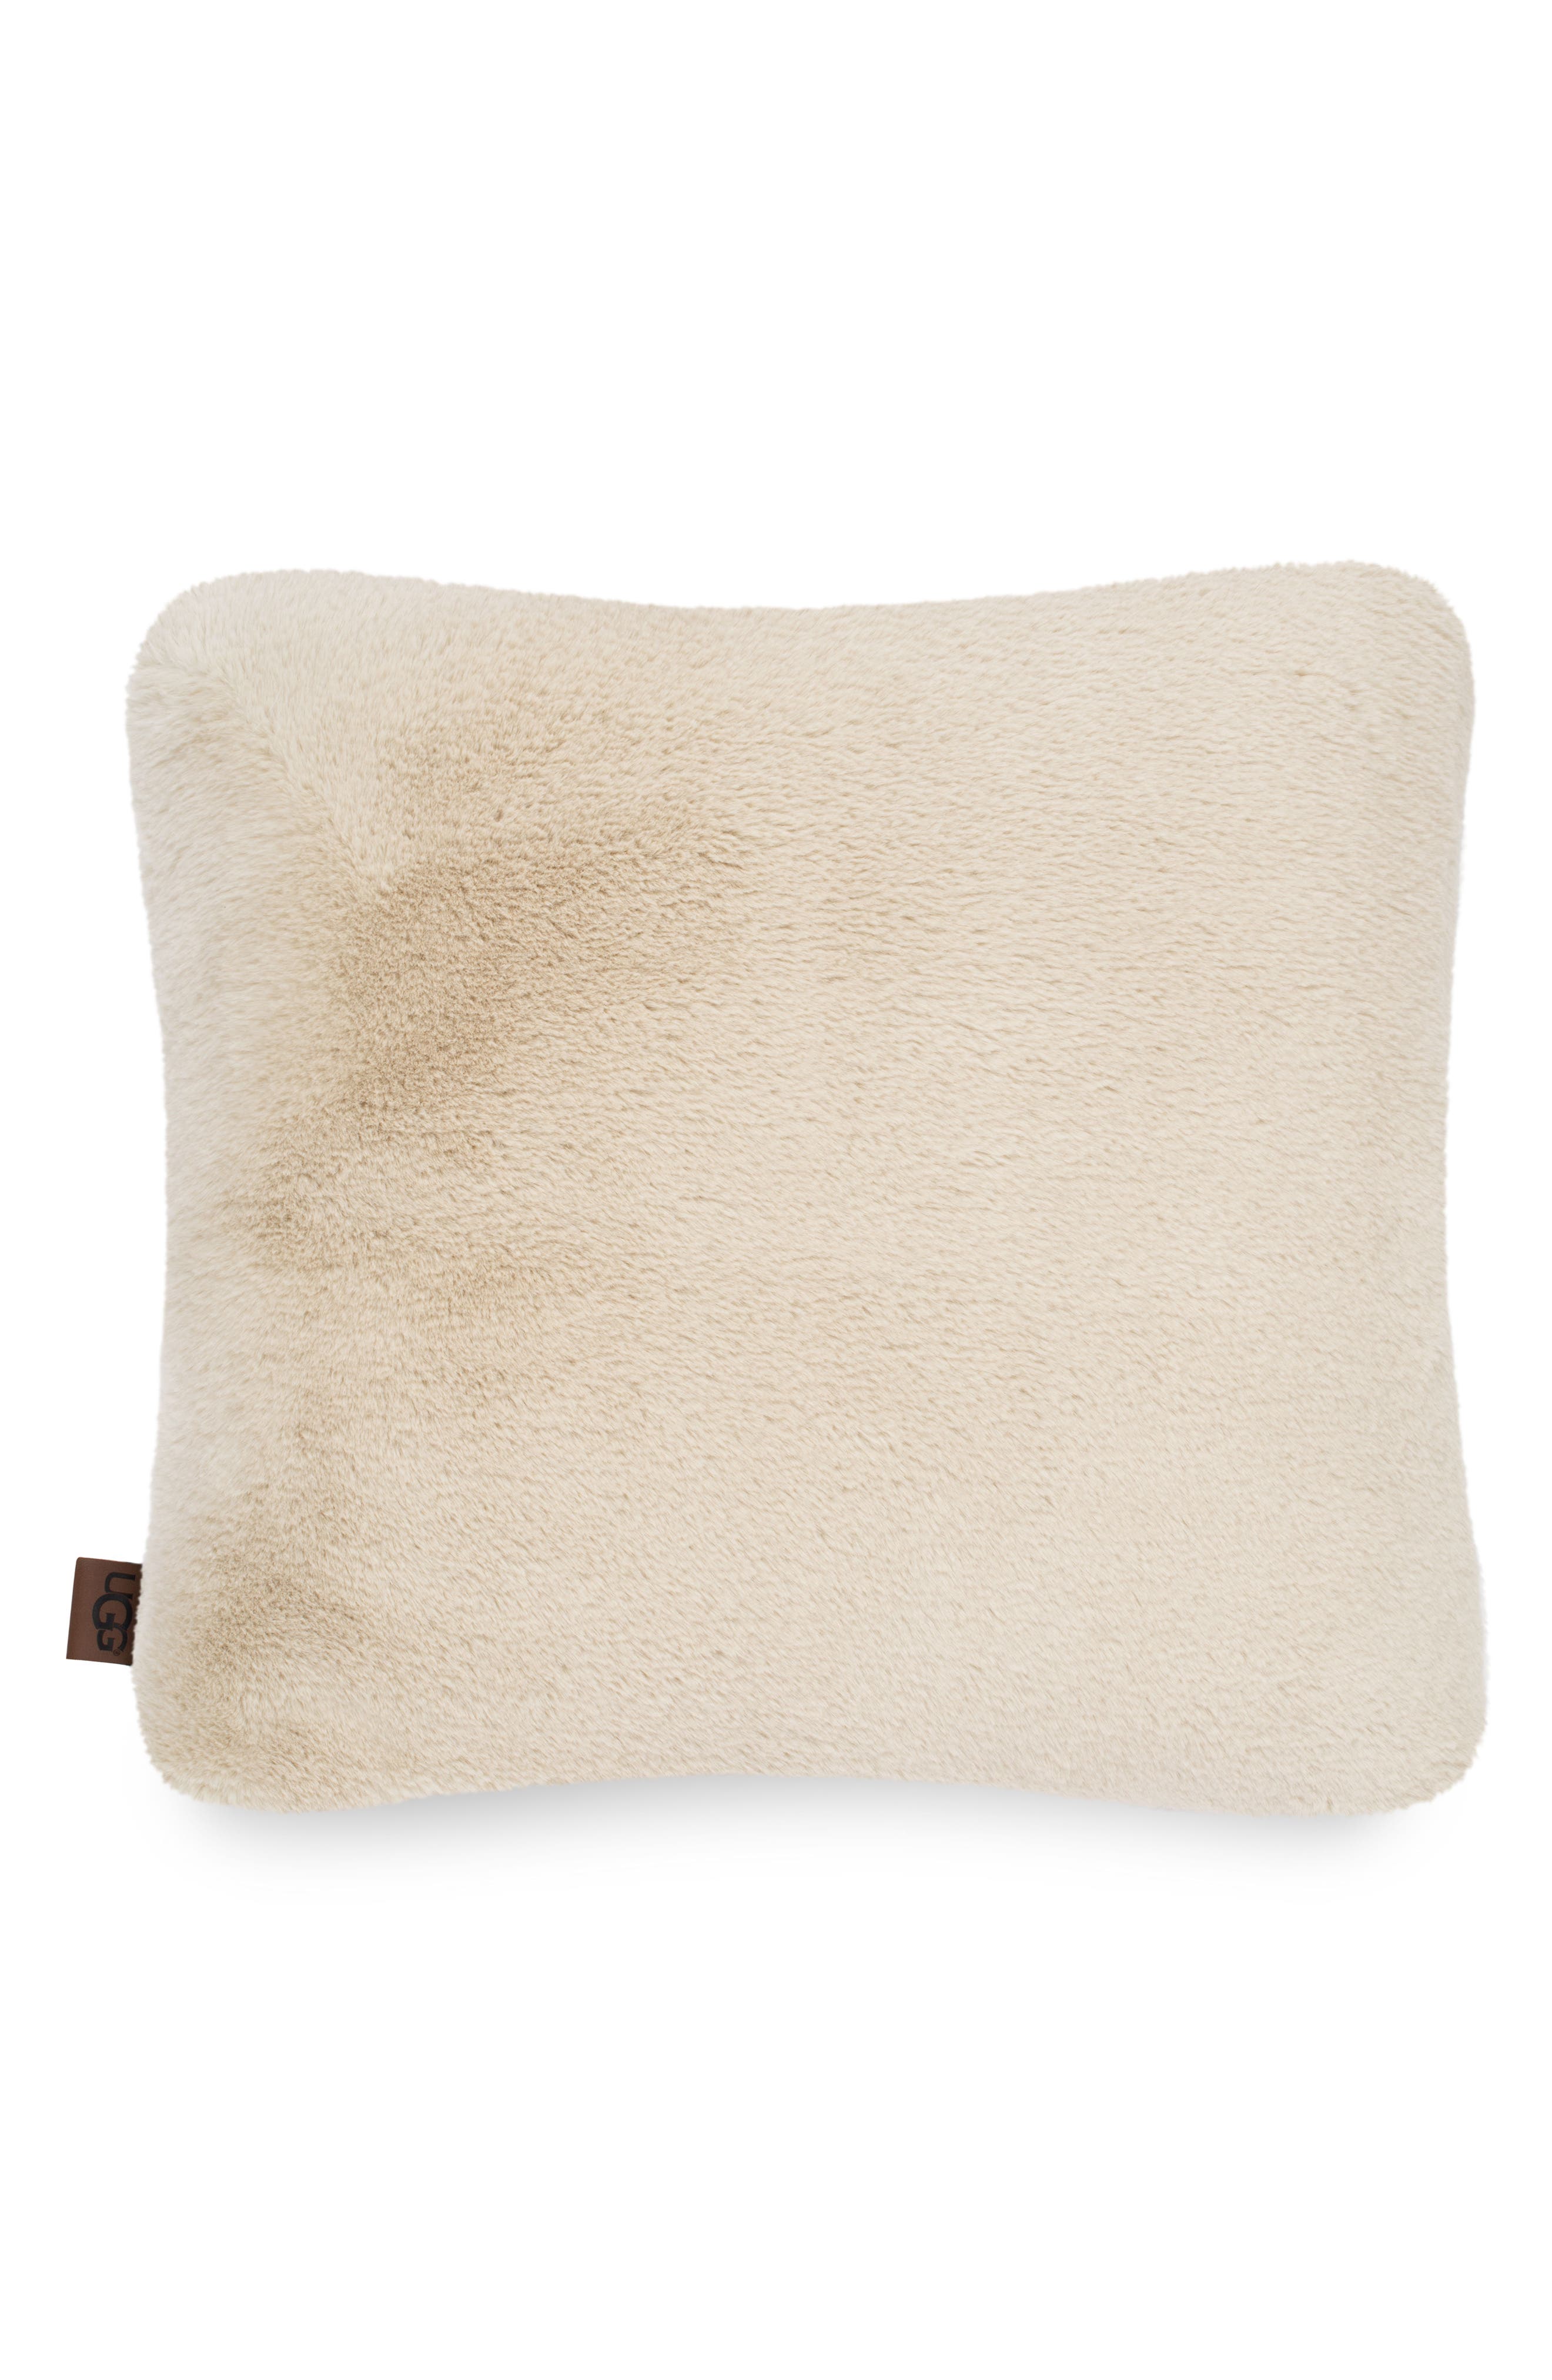 ugg pillows and throws